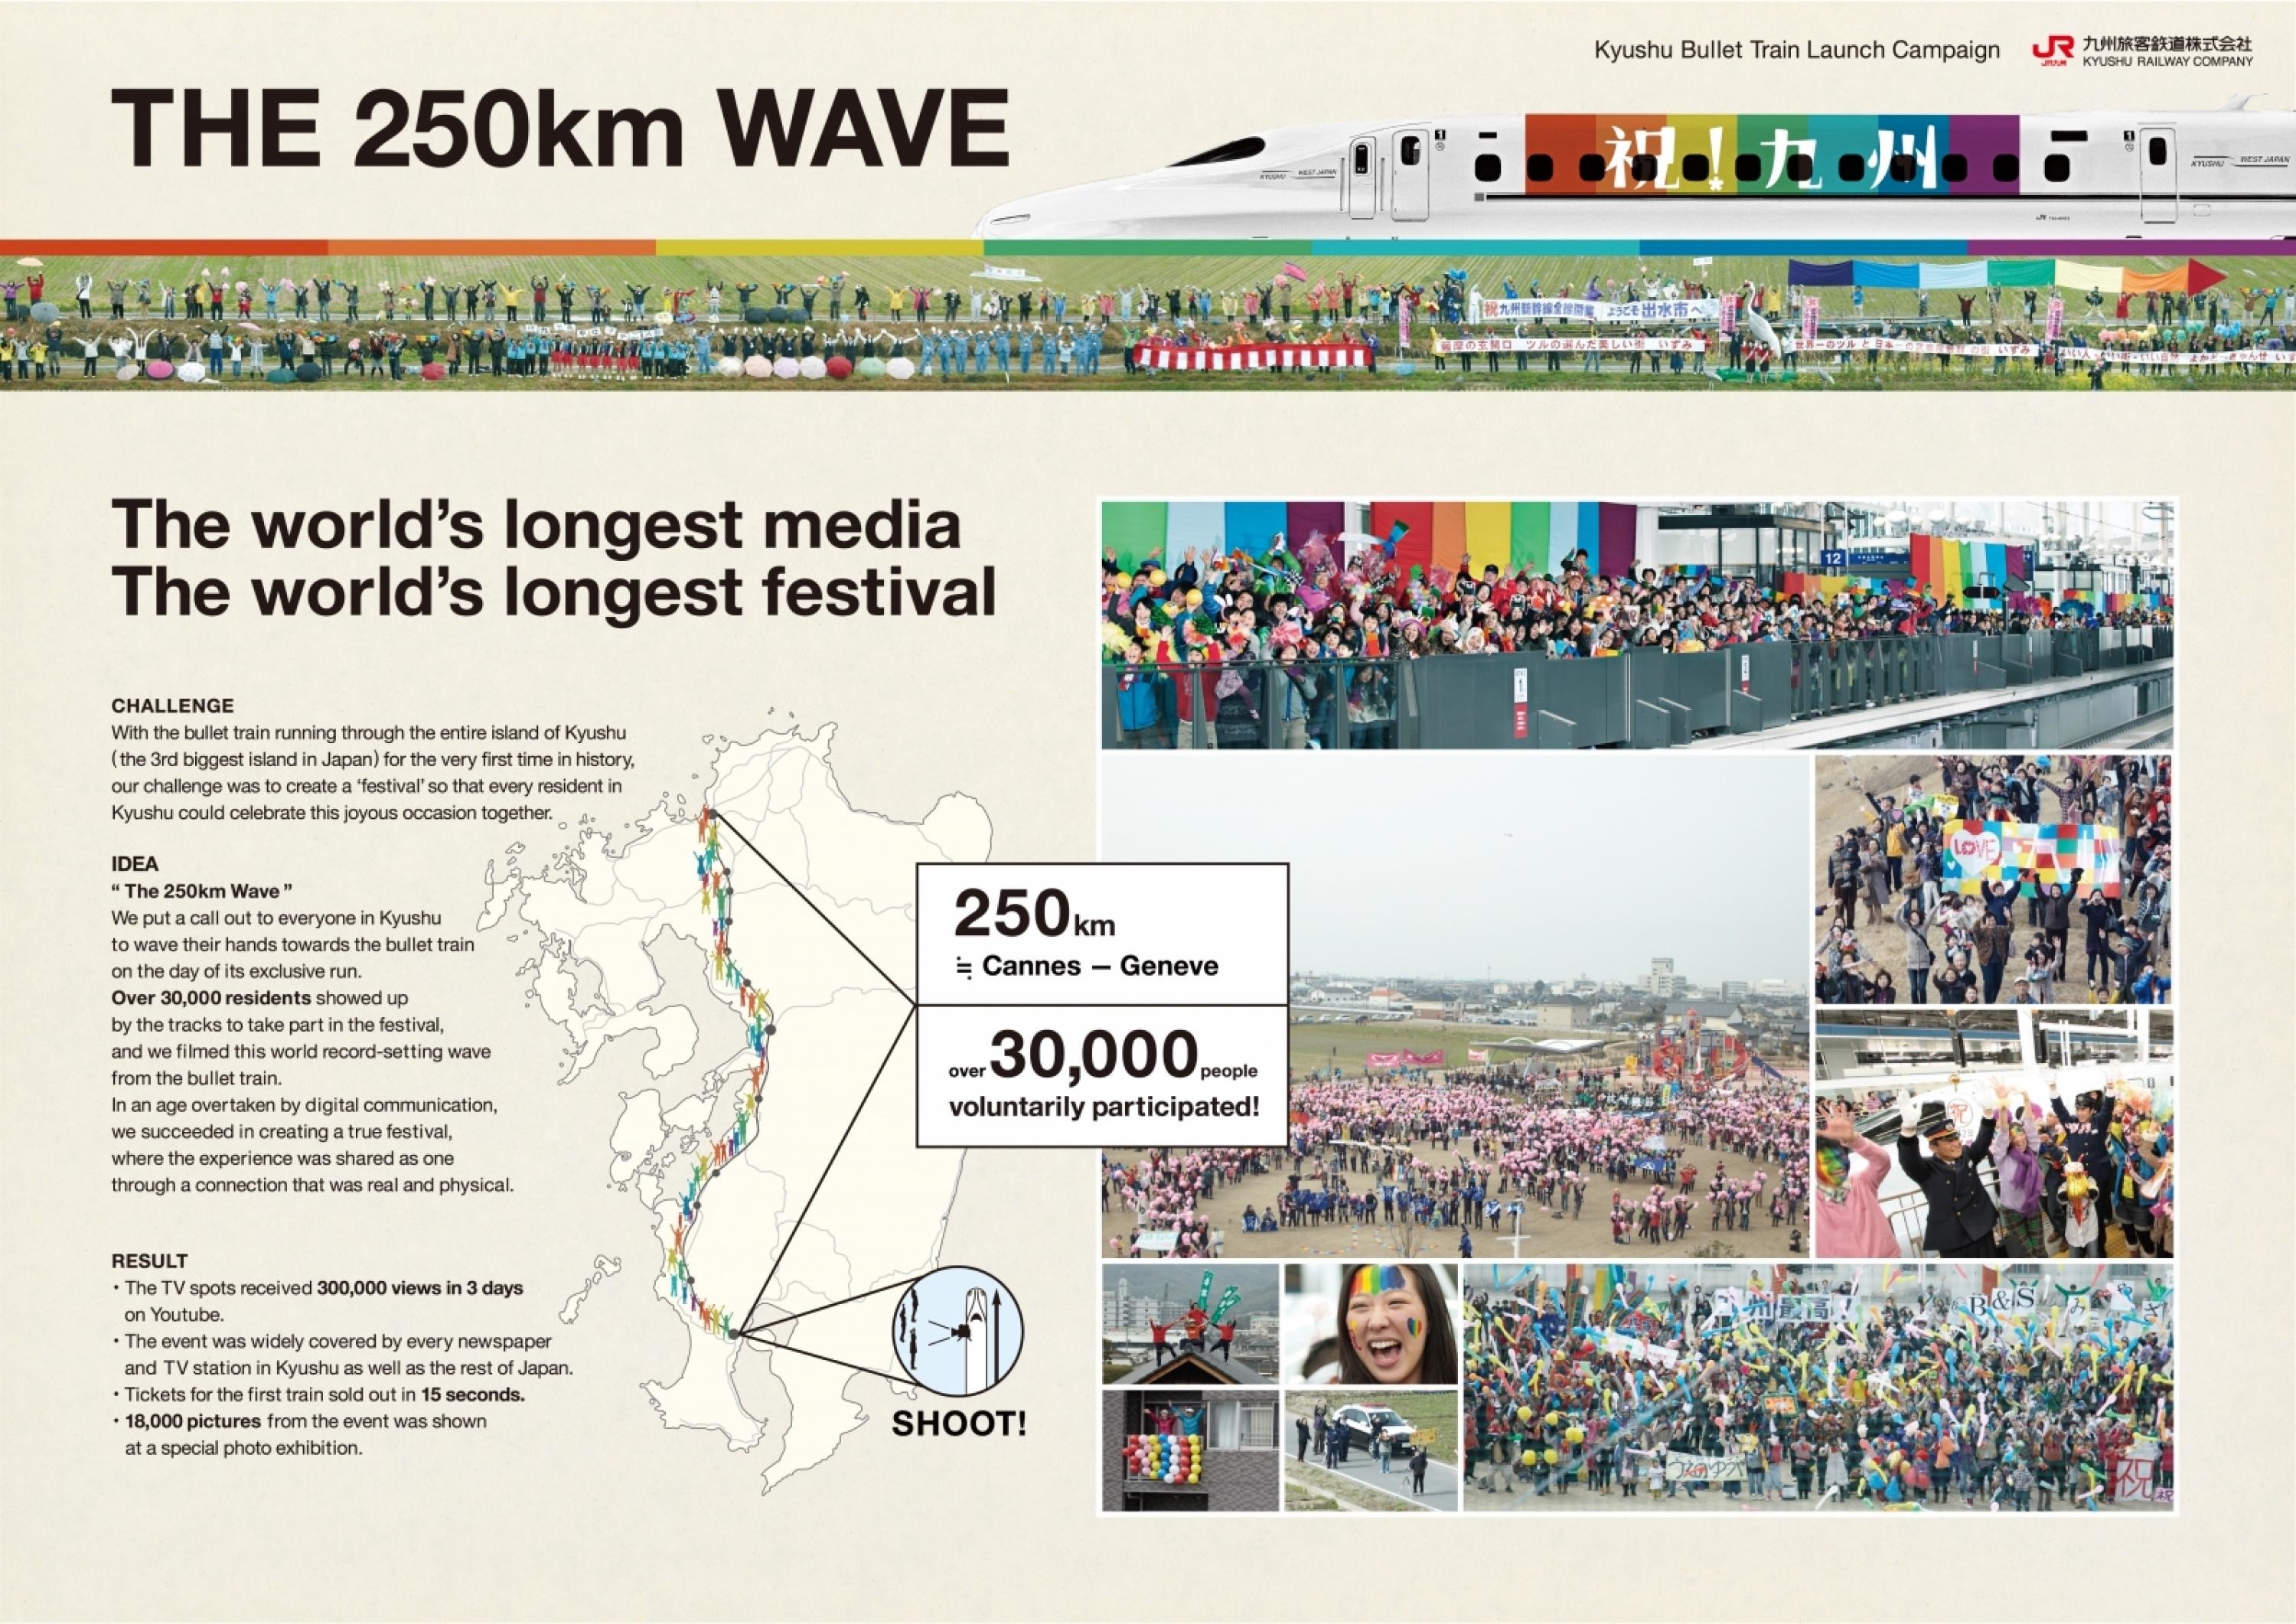 THE 250KM WAVE